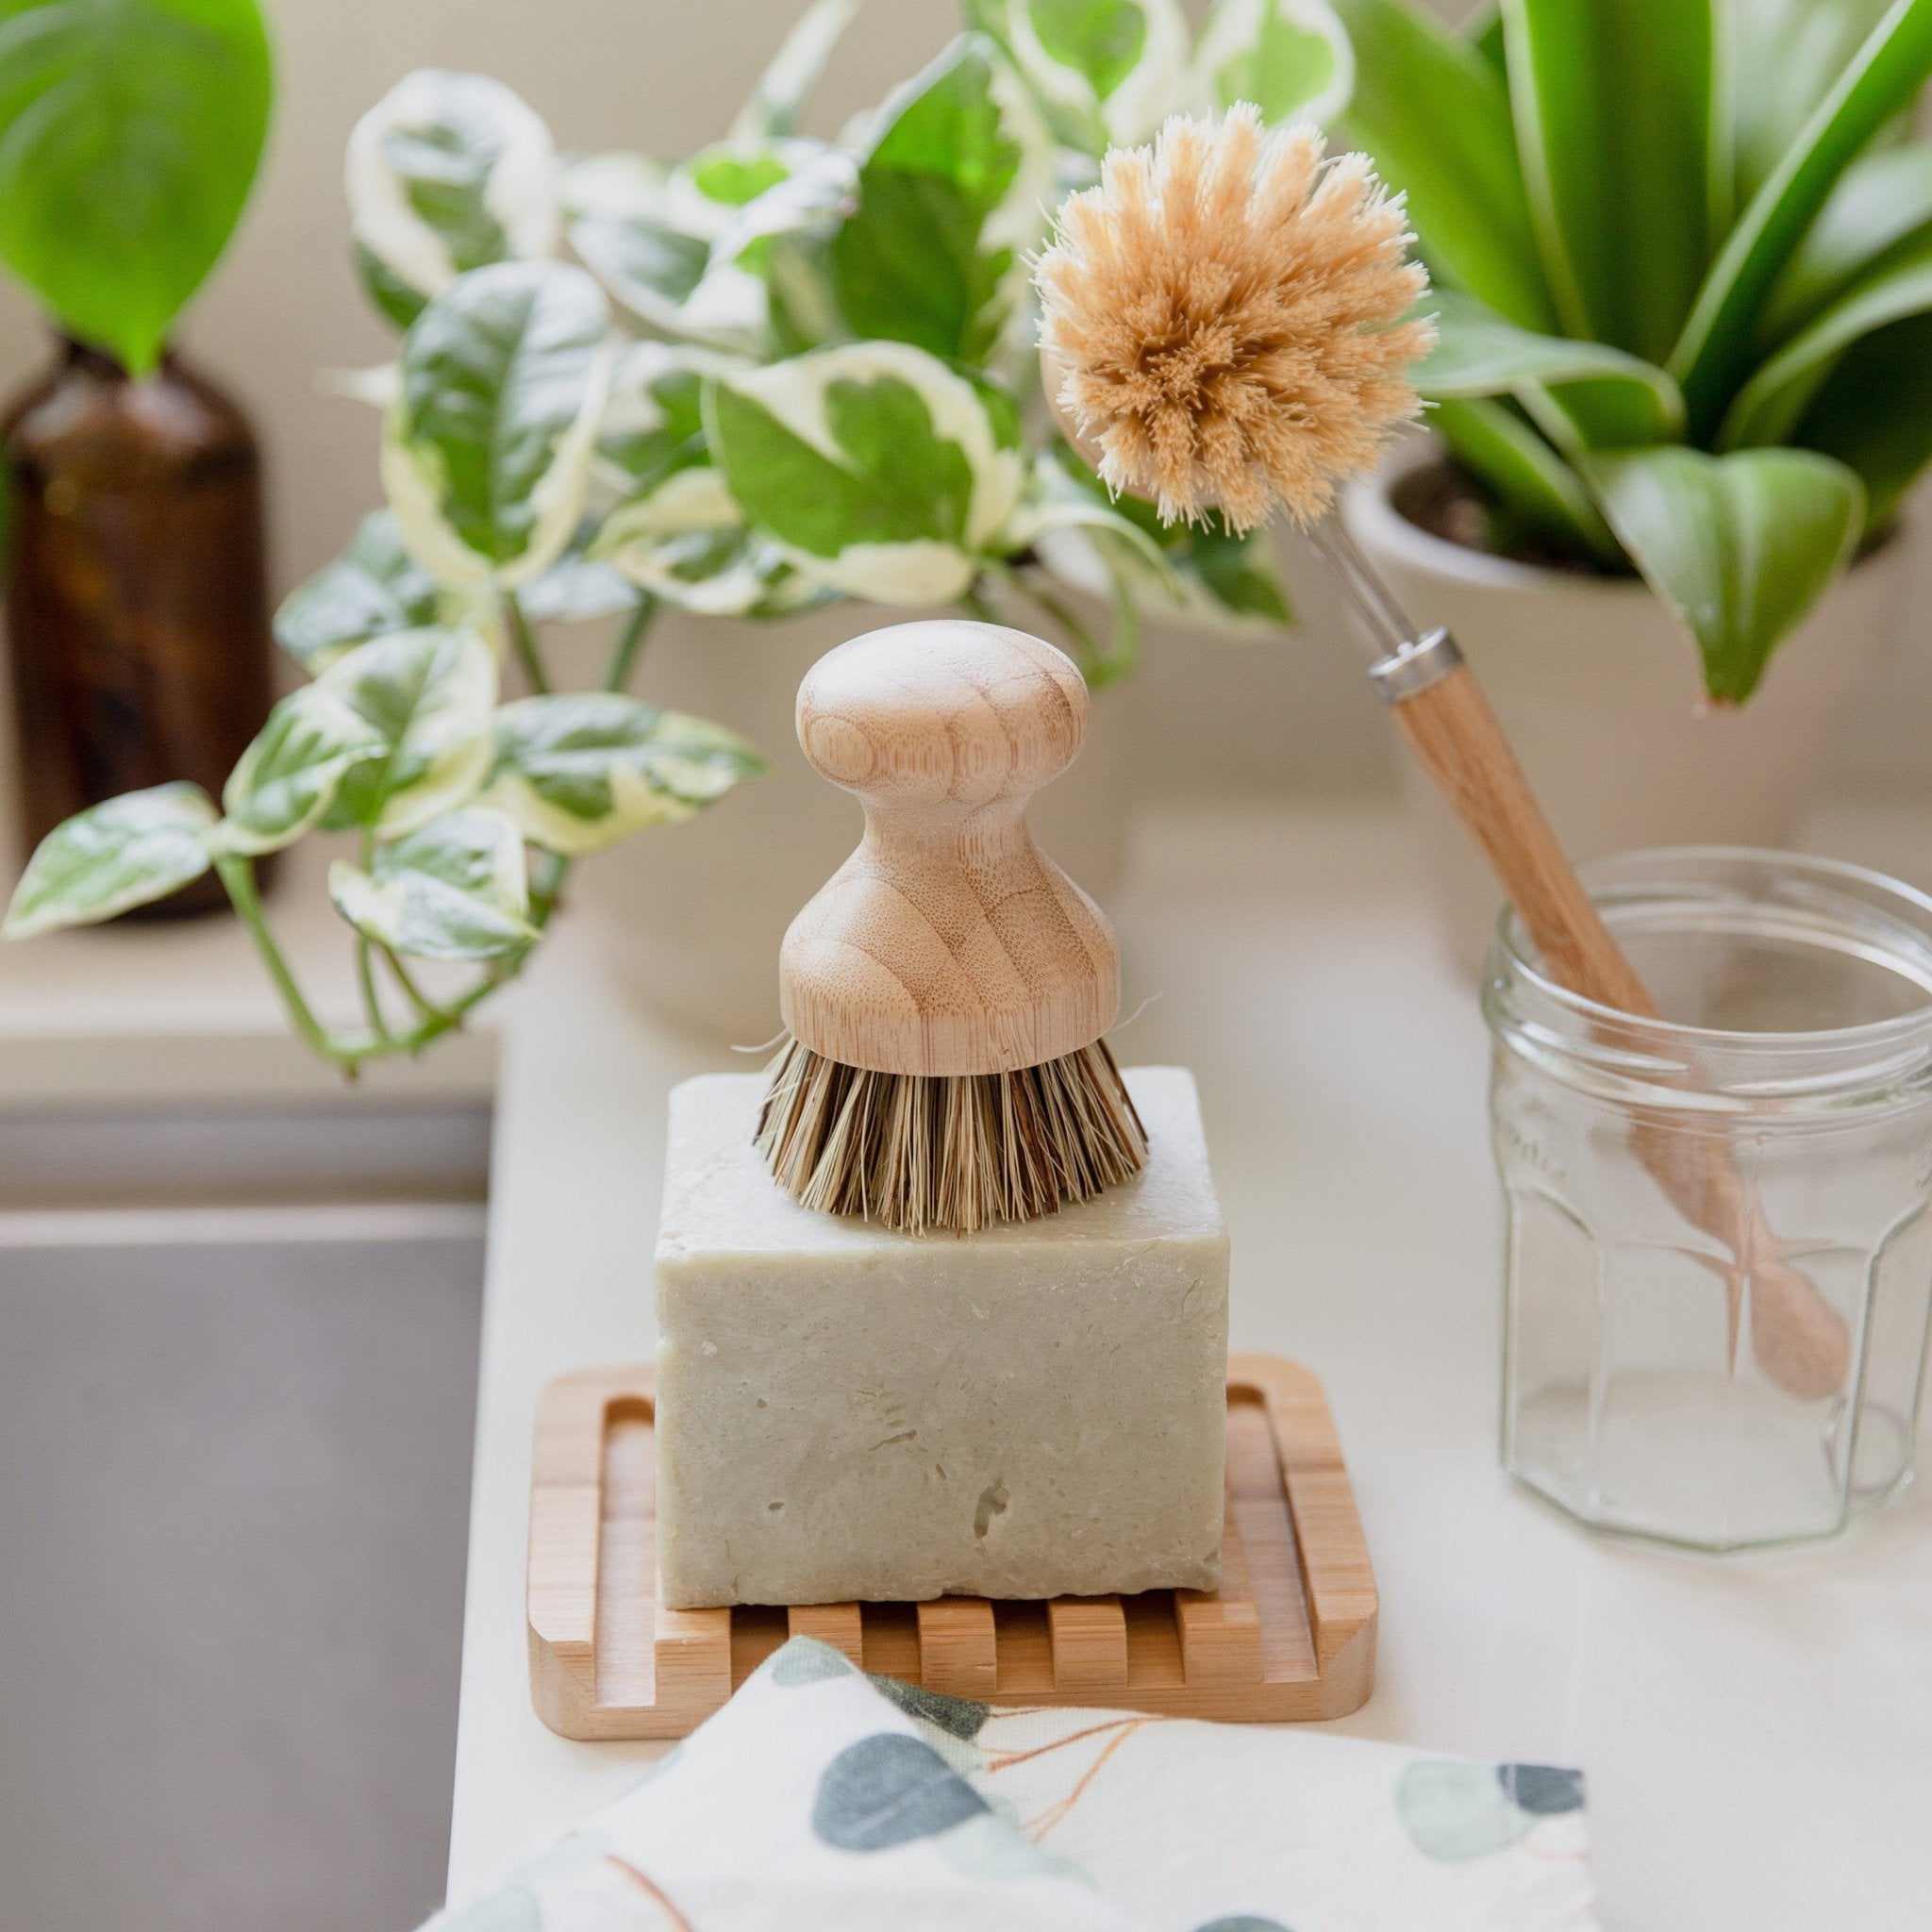 Sustainable Kitchen Bundle: Solid Dish Soap, Waterfall Soap Dish, Sisal Cleaning Brush, Pot Scrubber